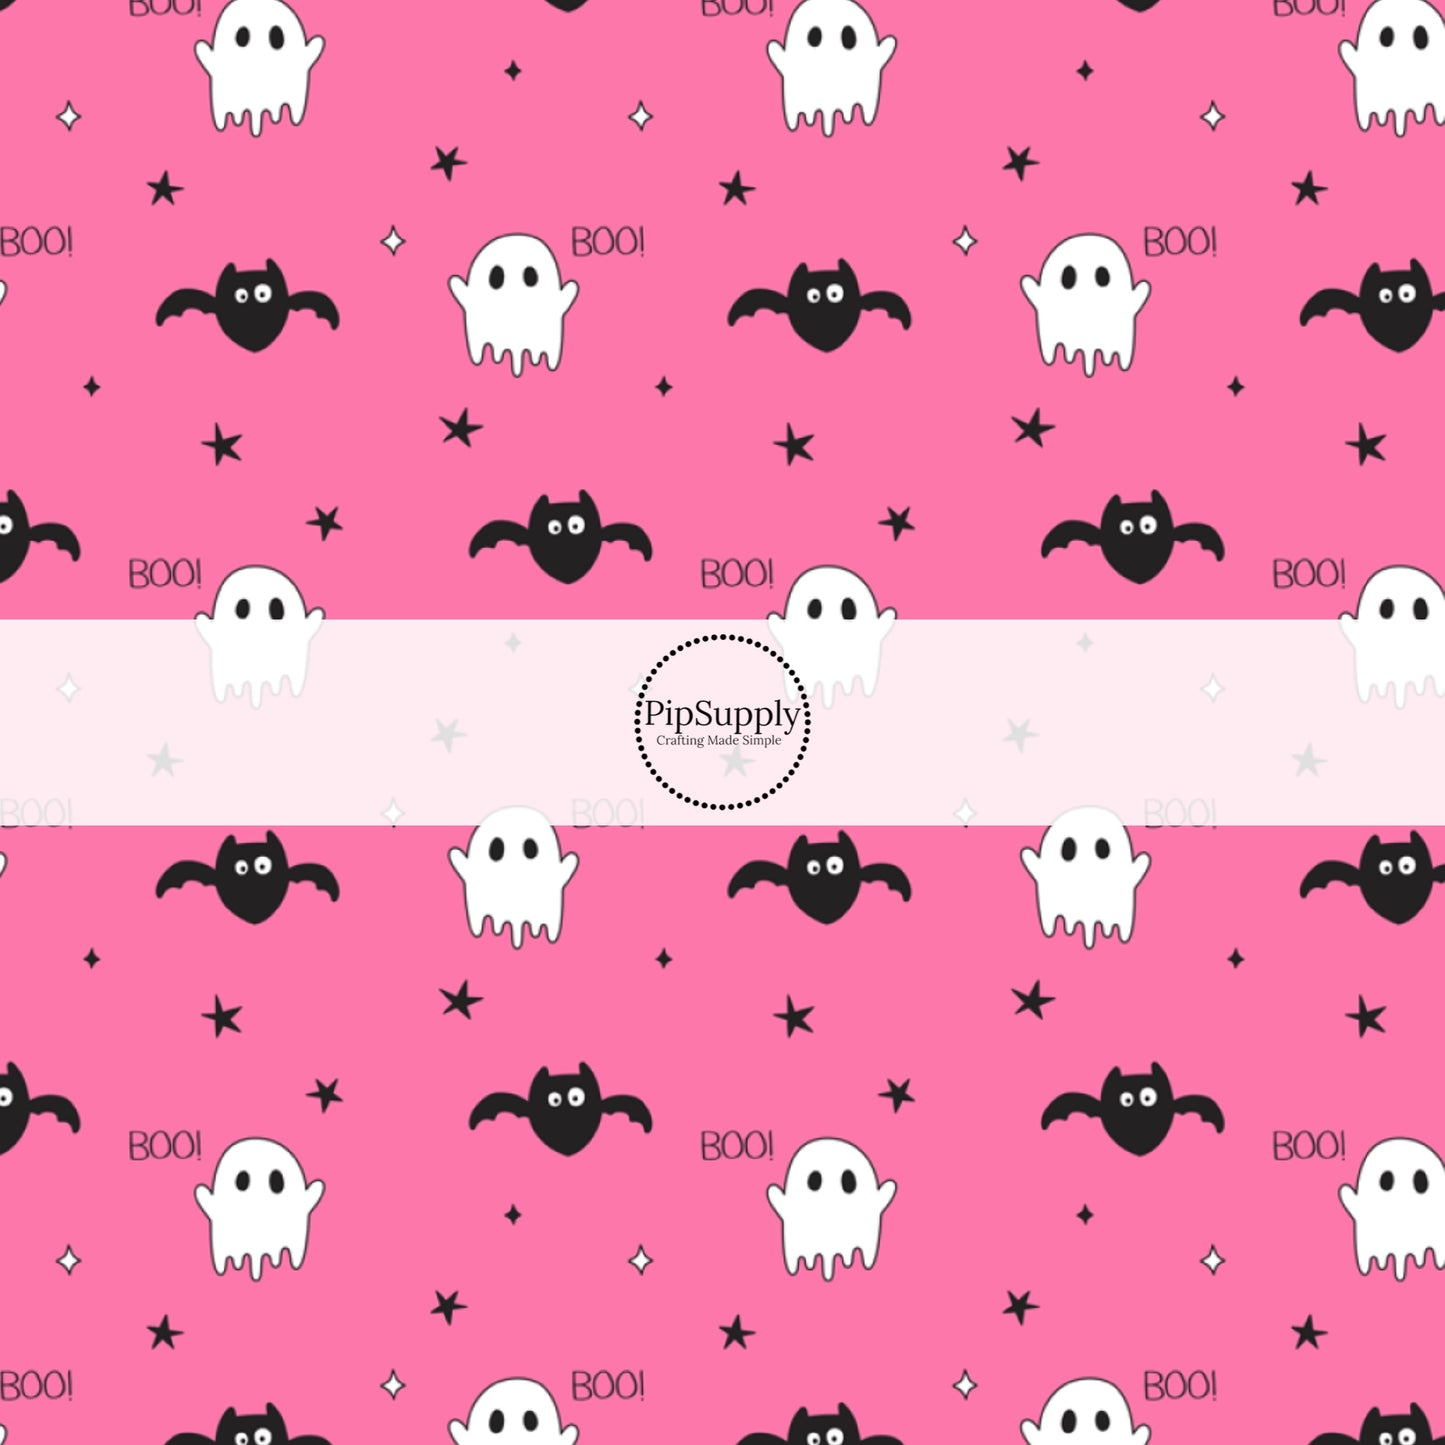 Bats, ghost, and stars with sayings on pink hair bow strip